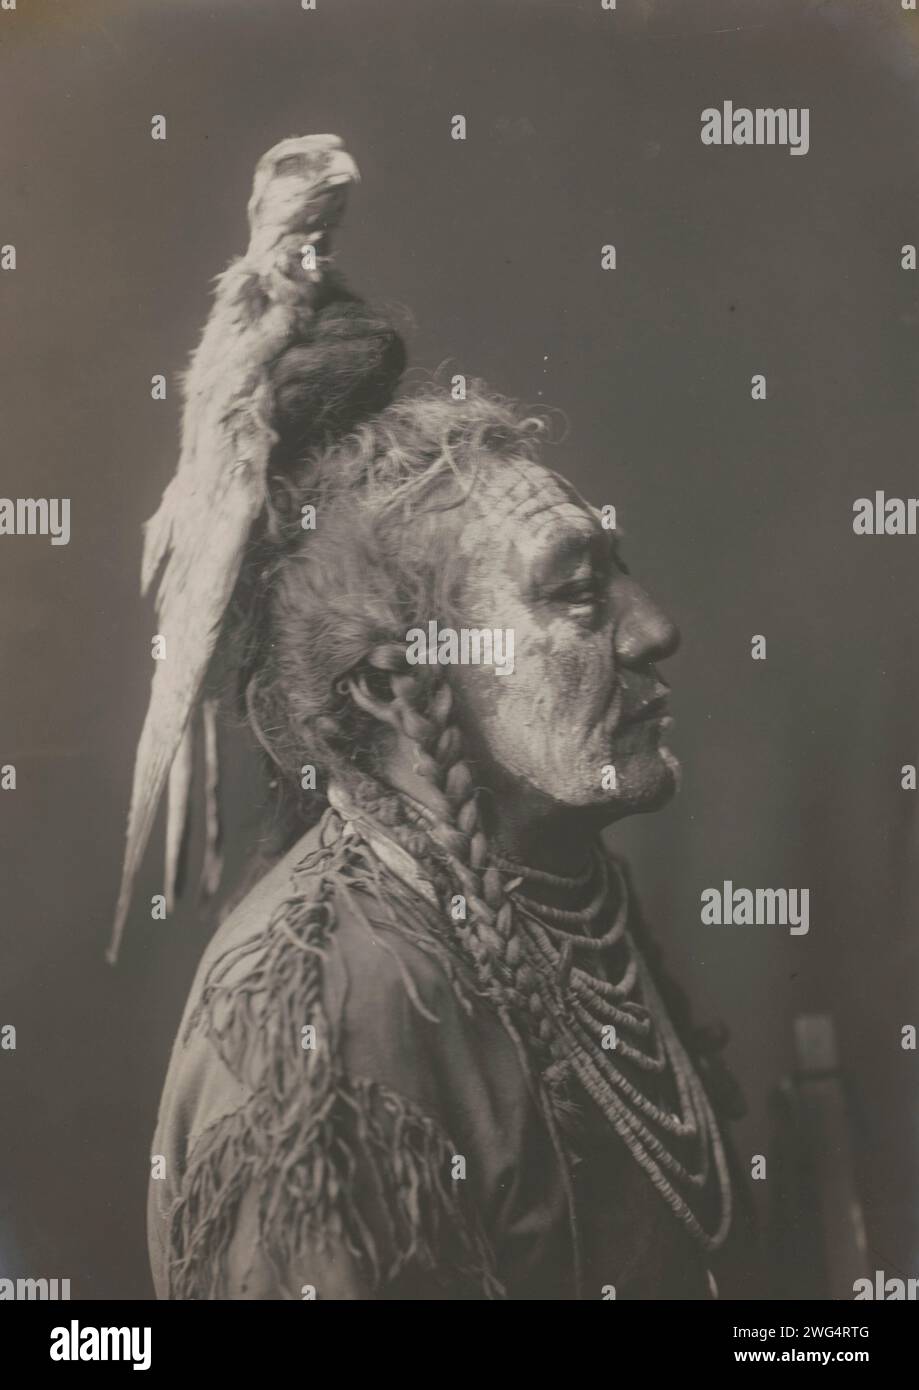 Two Whistles [A]-Apsaroke, c1908. Photograph shows Two Whistles, an Apsaroke man, head-and-shoulders portrait, right profile, face painted, wearing medicine hawk headdress, buckskin shirt, and shell necklaces. Stock Photo